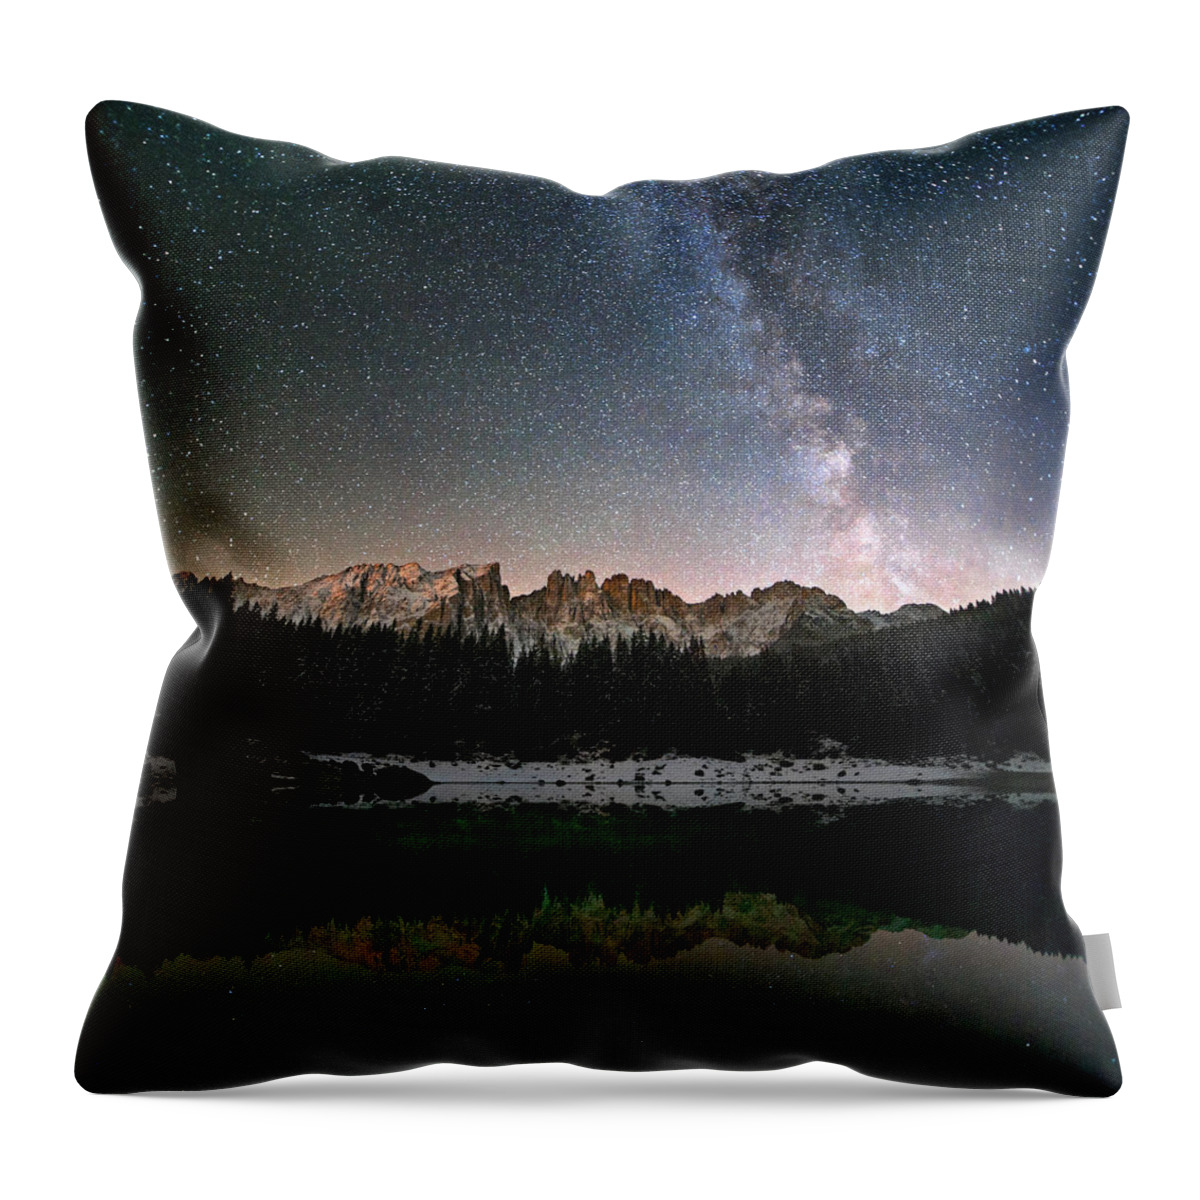 Scenics Throw Pillow featuring the photograph Milky Way In The Alps by Scacciamosche